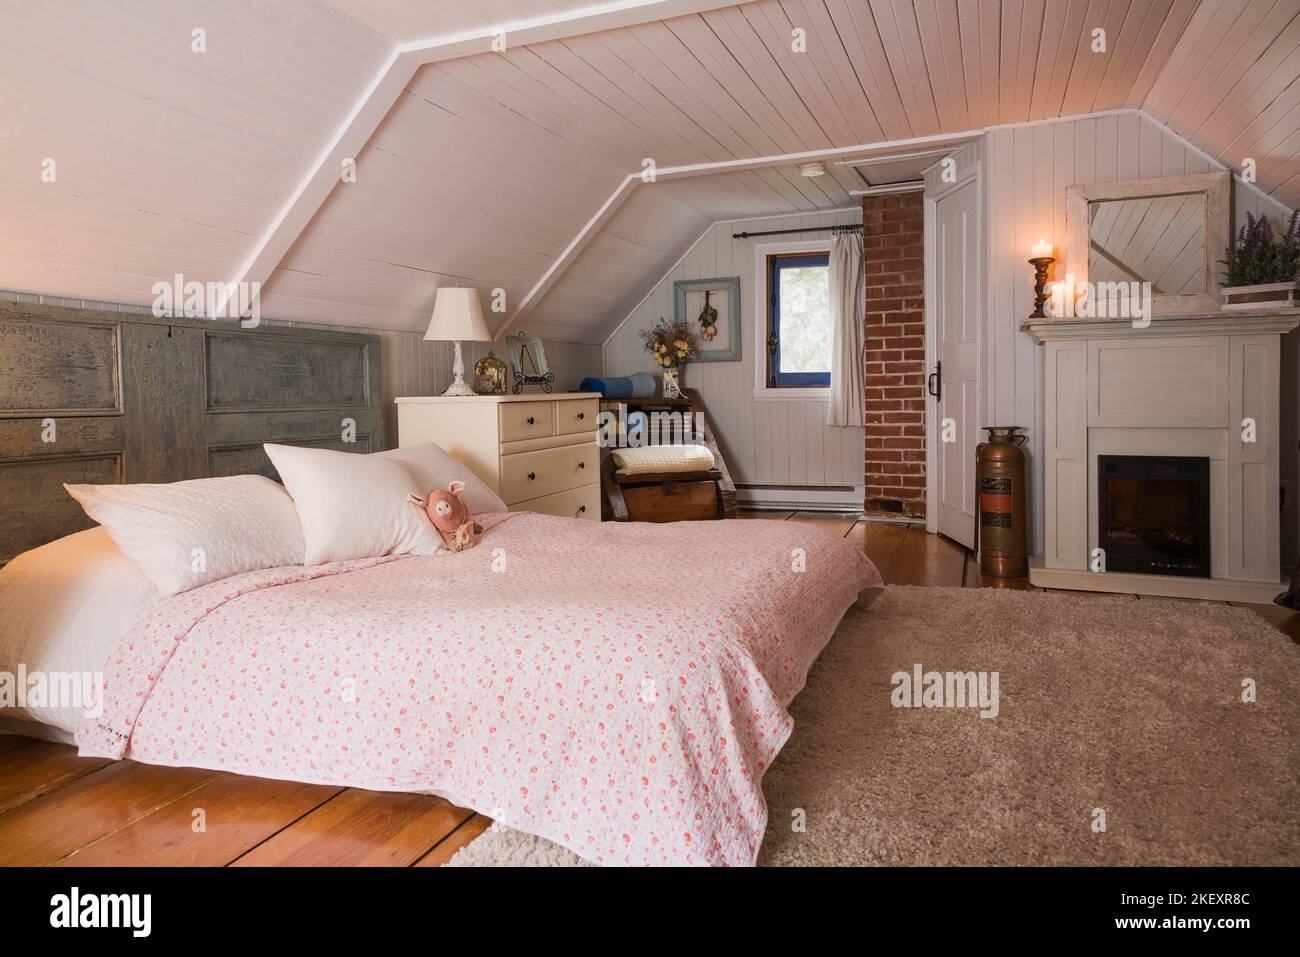 King size bed with salvaged door as a headboard and antique furniture in the master bedroom on the upstairs floor inside an old 1862 home. Stock Photo